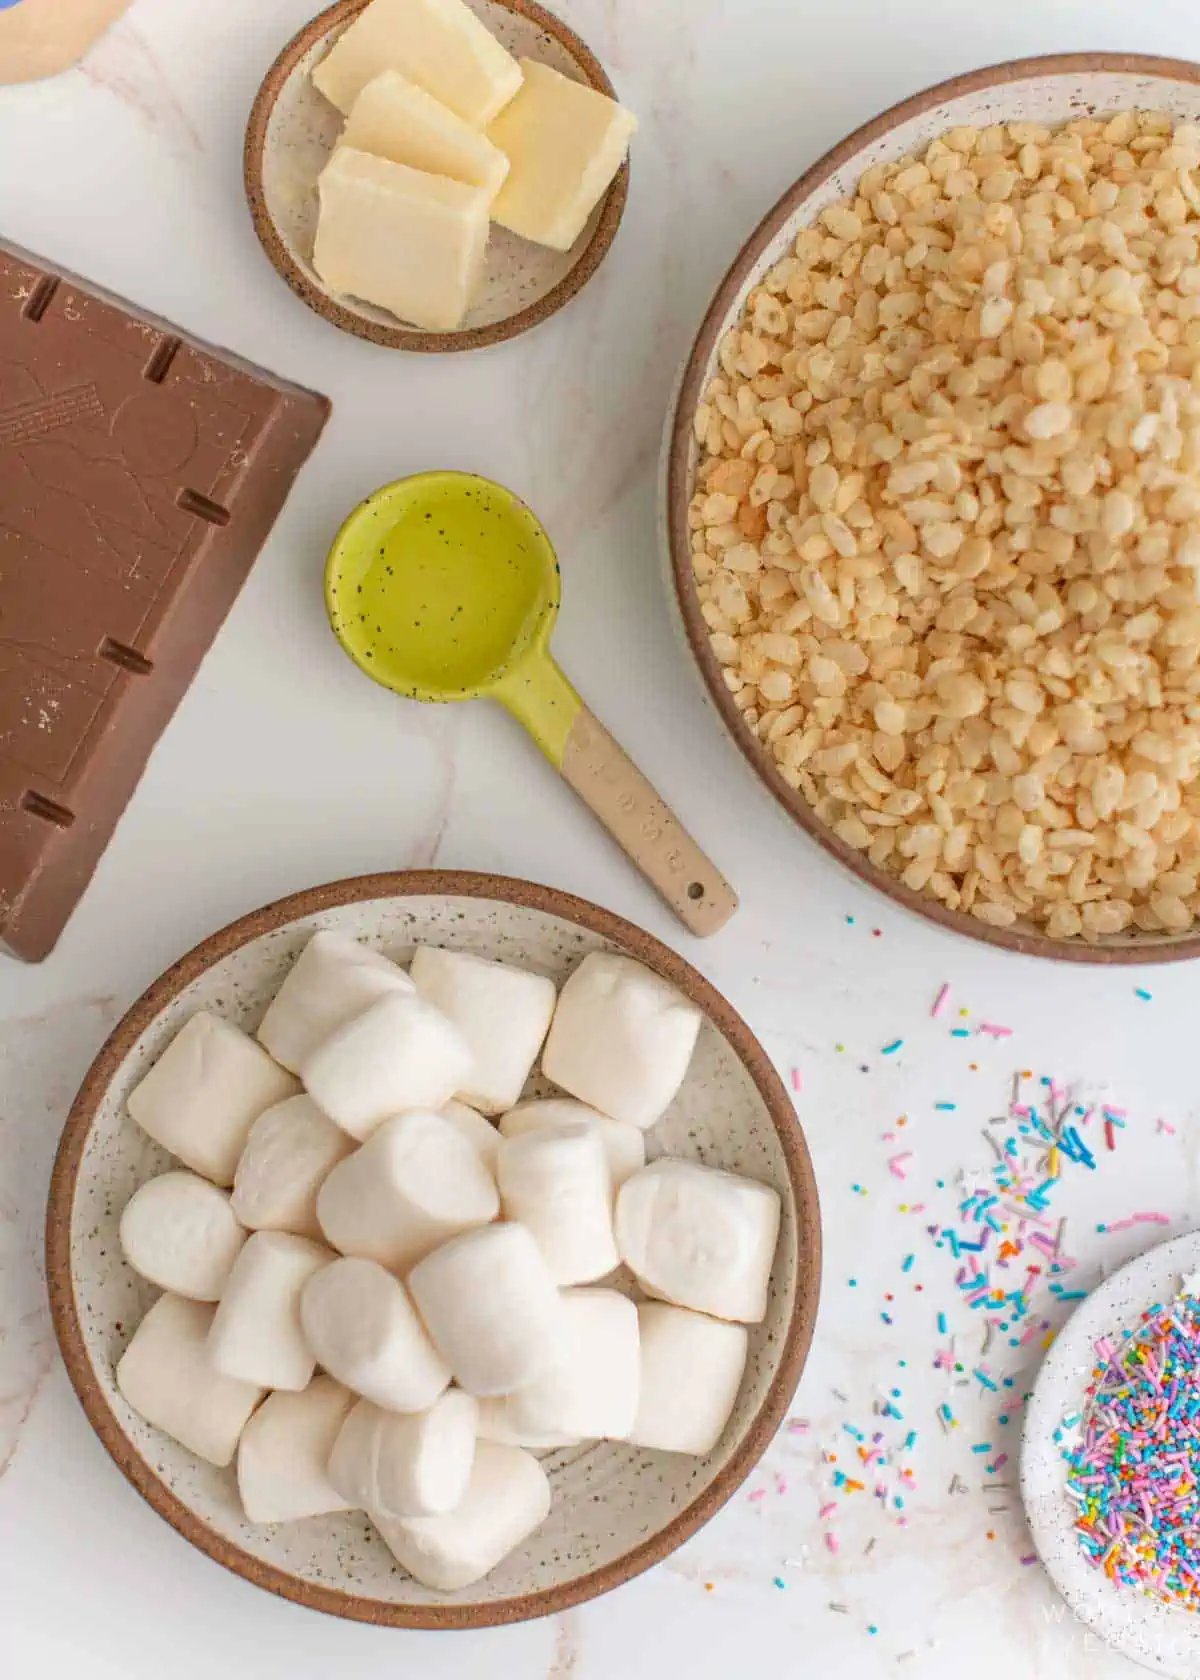 vegan rice krispies treat ingredients laid out on a table